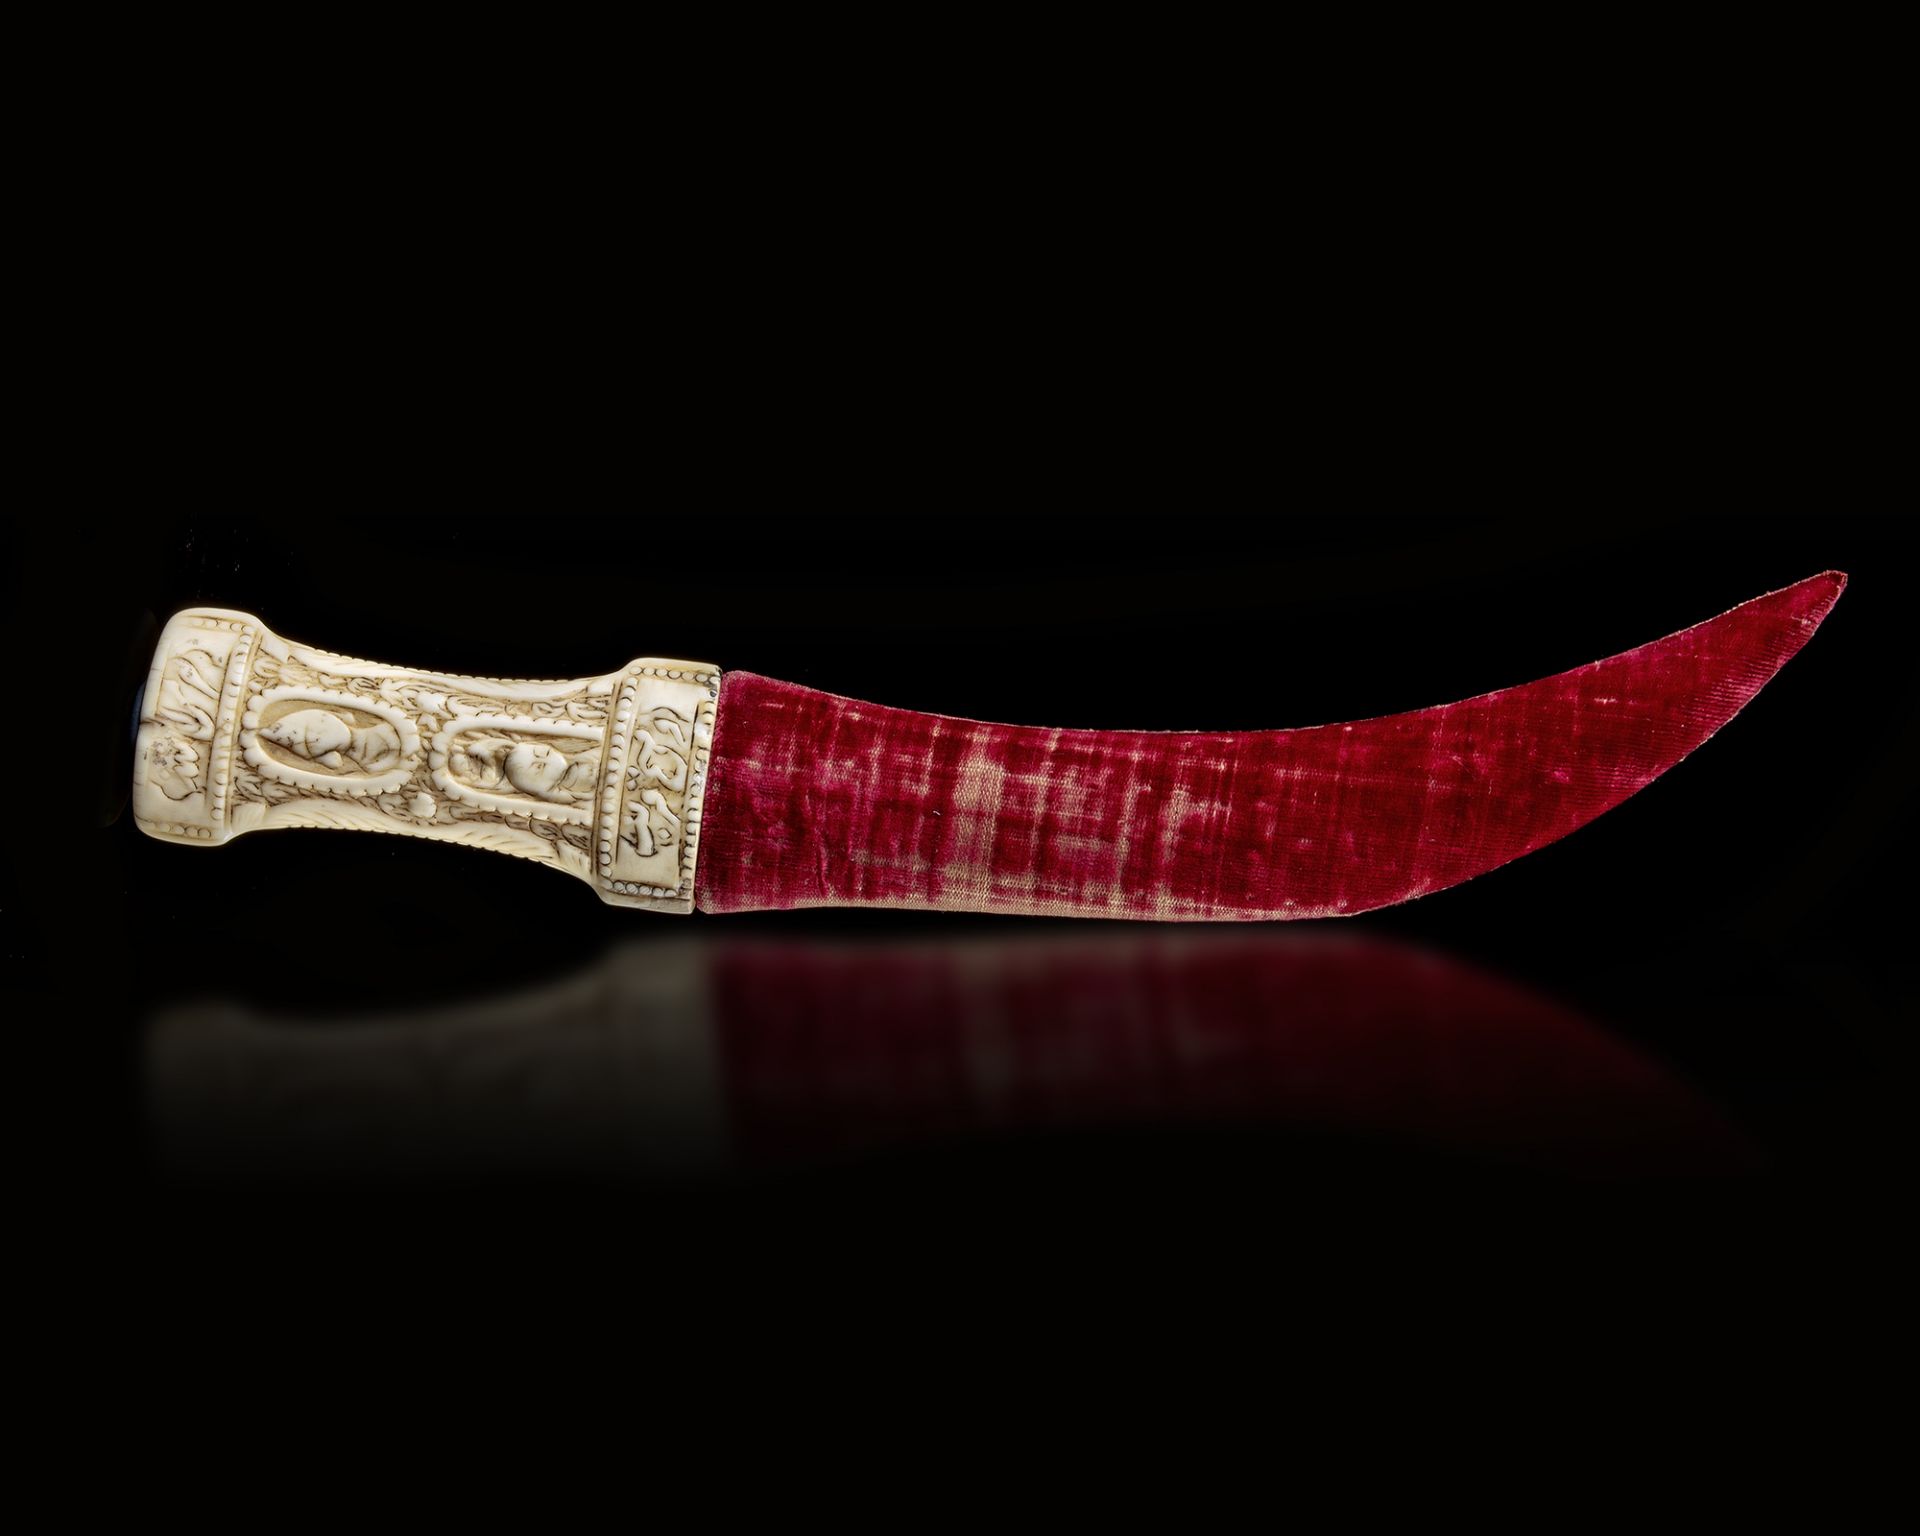 A QAJAR IVORY HILTED DAGGER, PERSIA 19TH CENTURY - Image 4 of 4